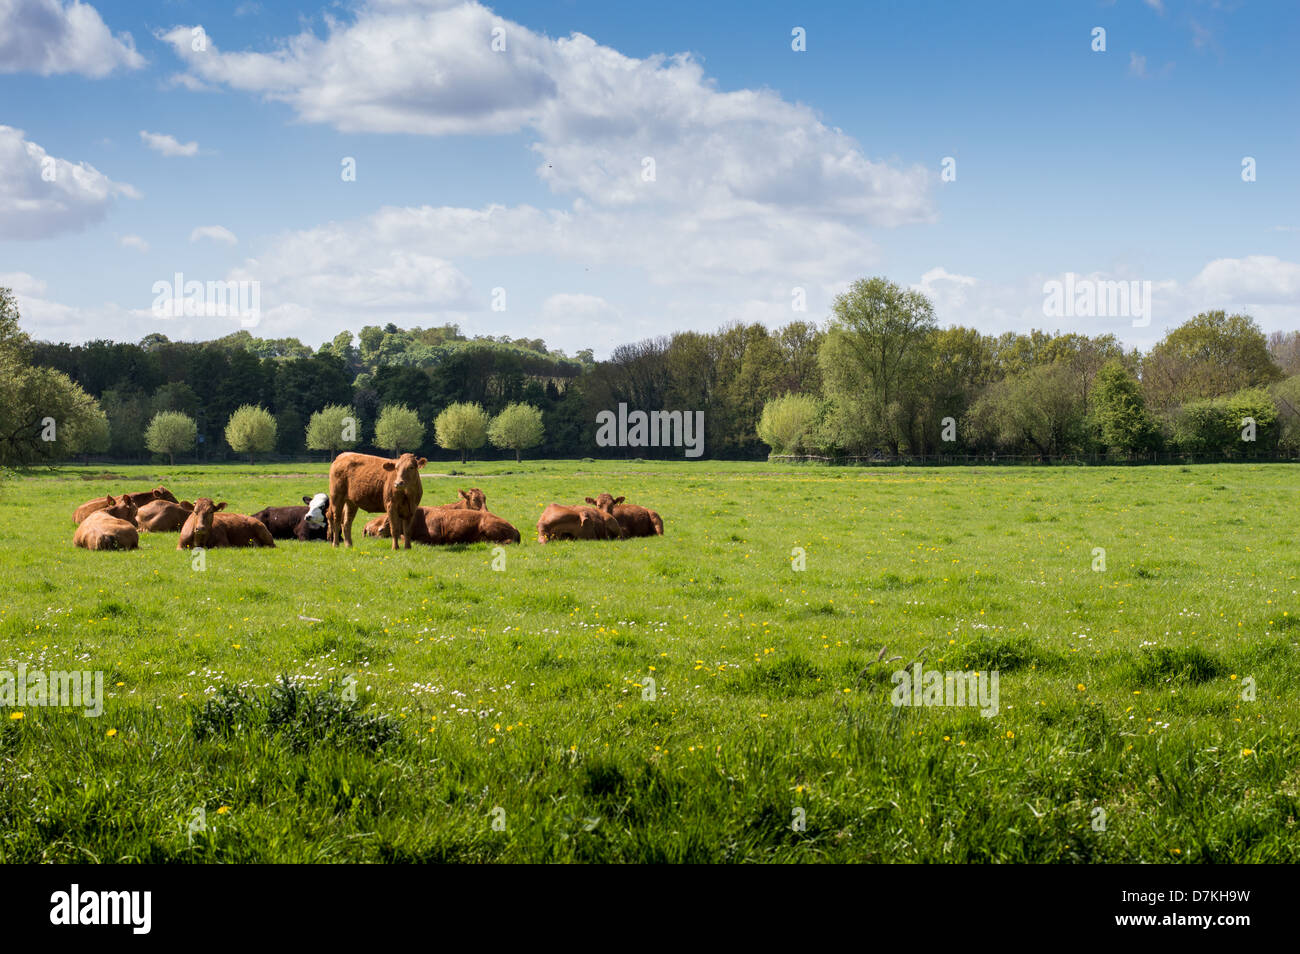 A number of brown dairy cows sat in a large green field of grass. Stock Photo